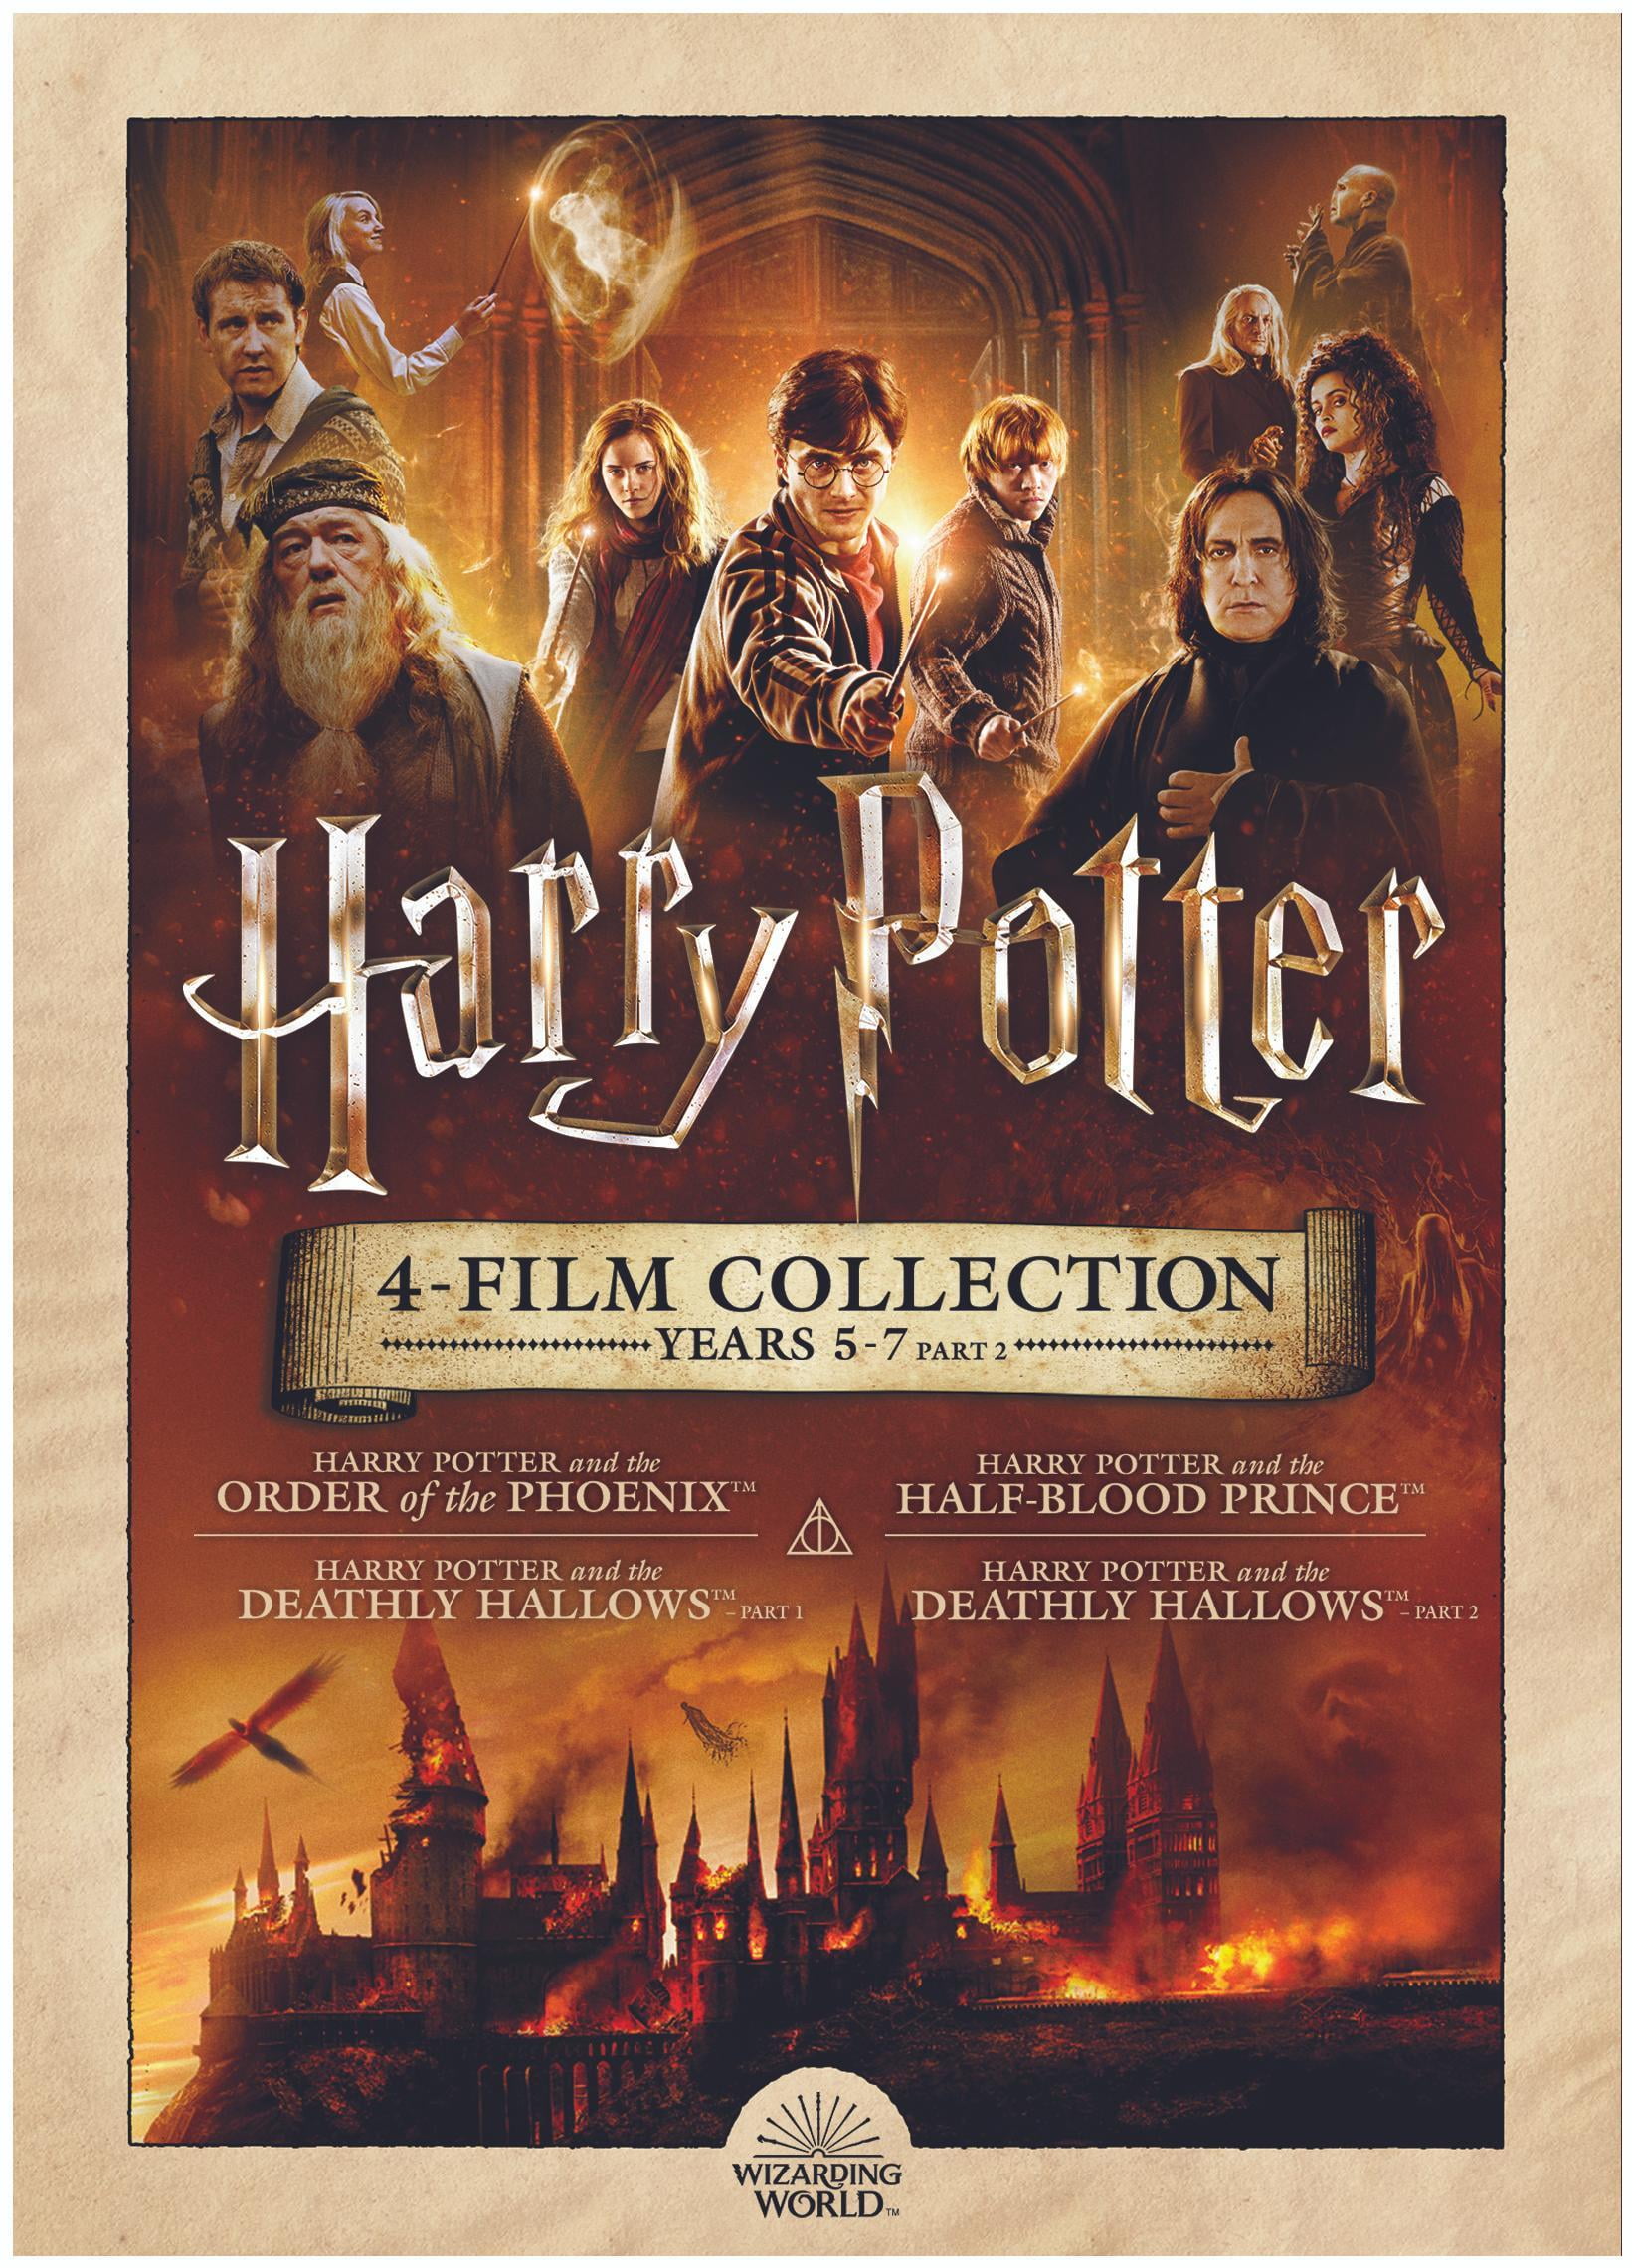 Harry Potter 4-Film Collection: Years 5-7 (DVD) (Walmart Exclusive)